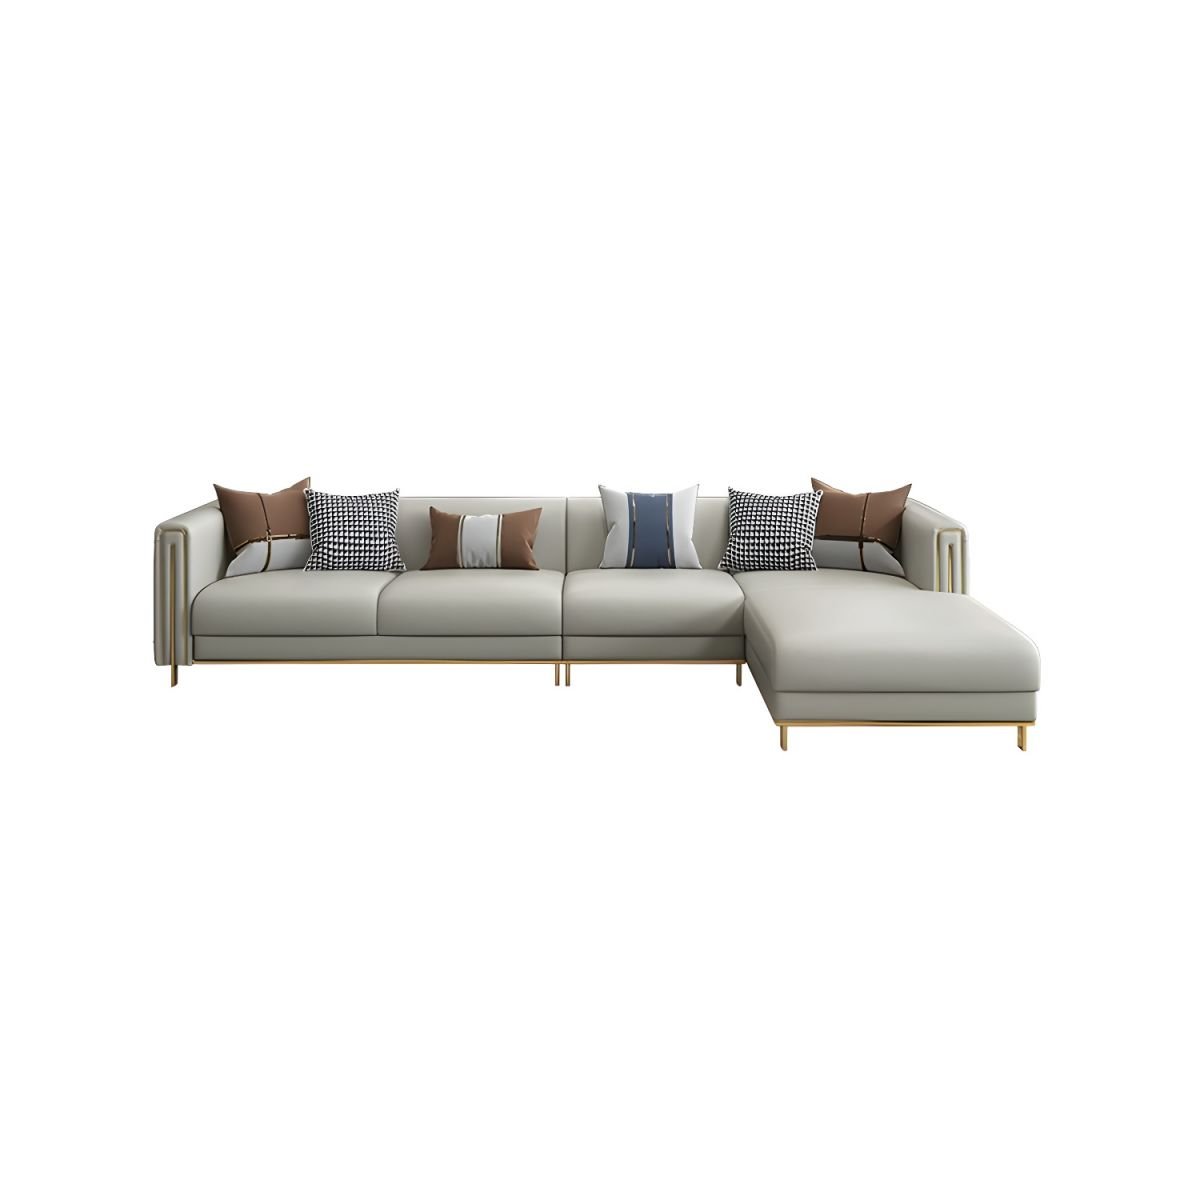 Beige Glam L-Shape Wooden Nappa Sofa Chaise with Square Arm, 26' Length - Right Nappa 120"L x 67"W x 29"H